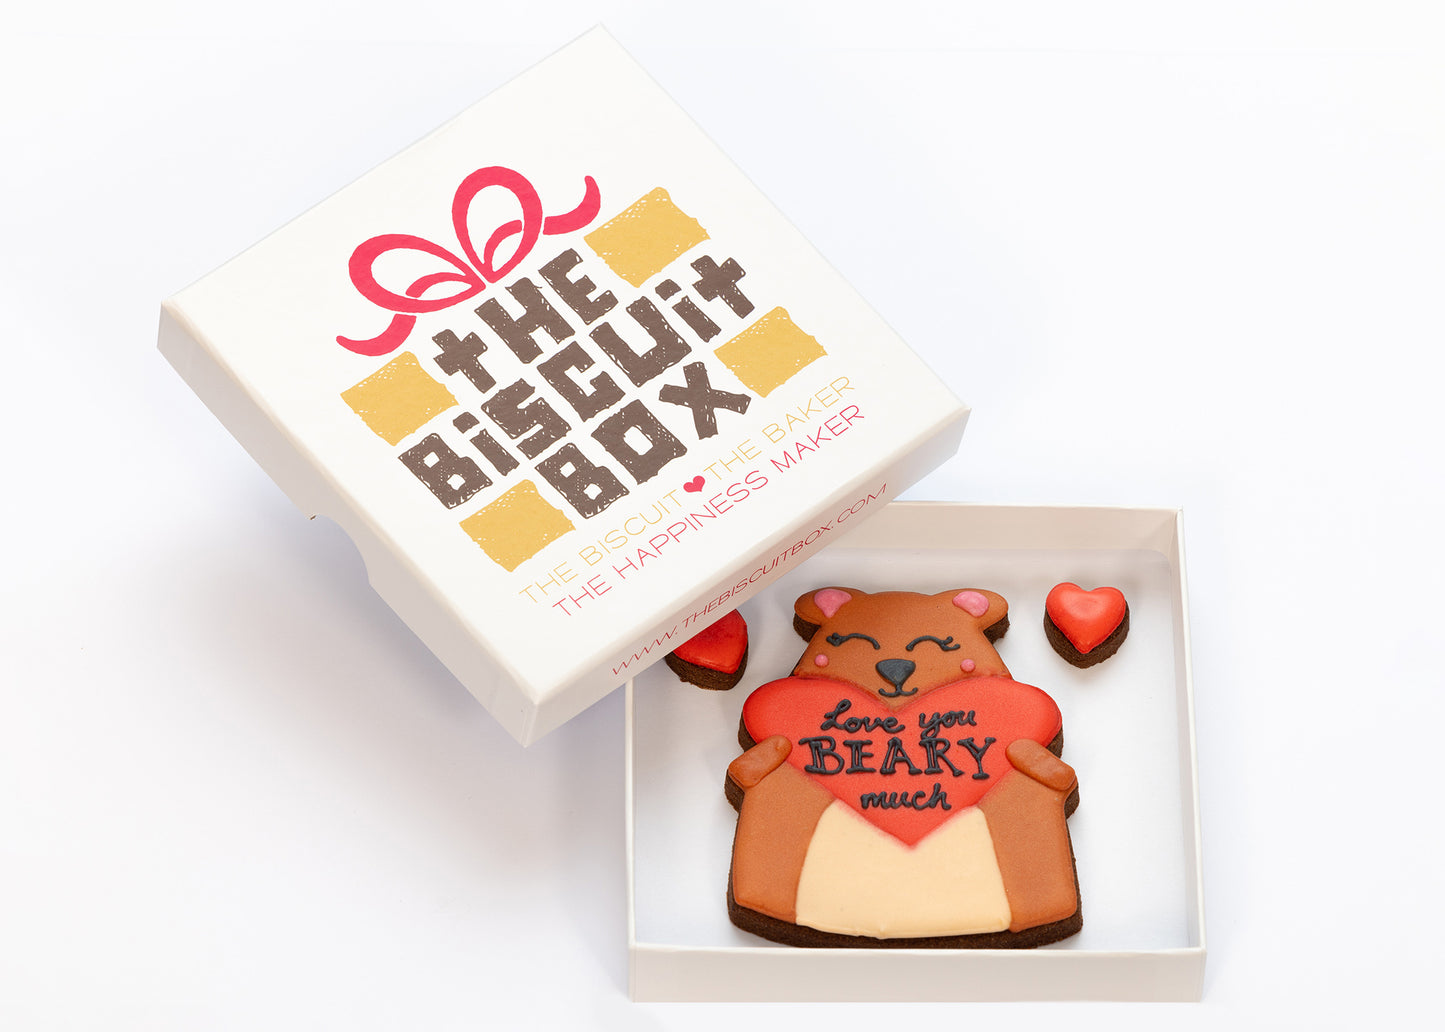 valentines day bear biscuit saying I love you bear much